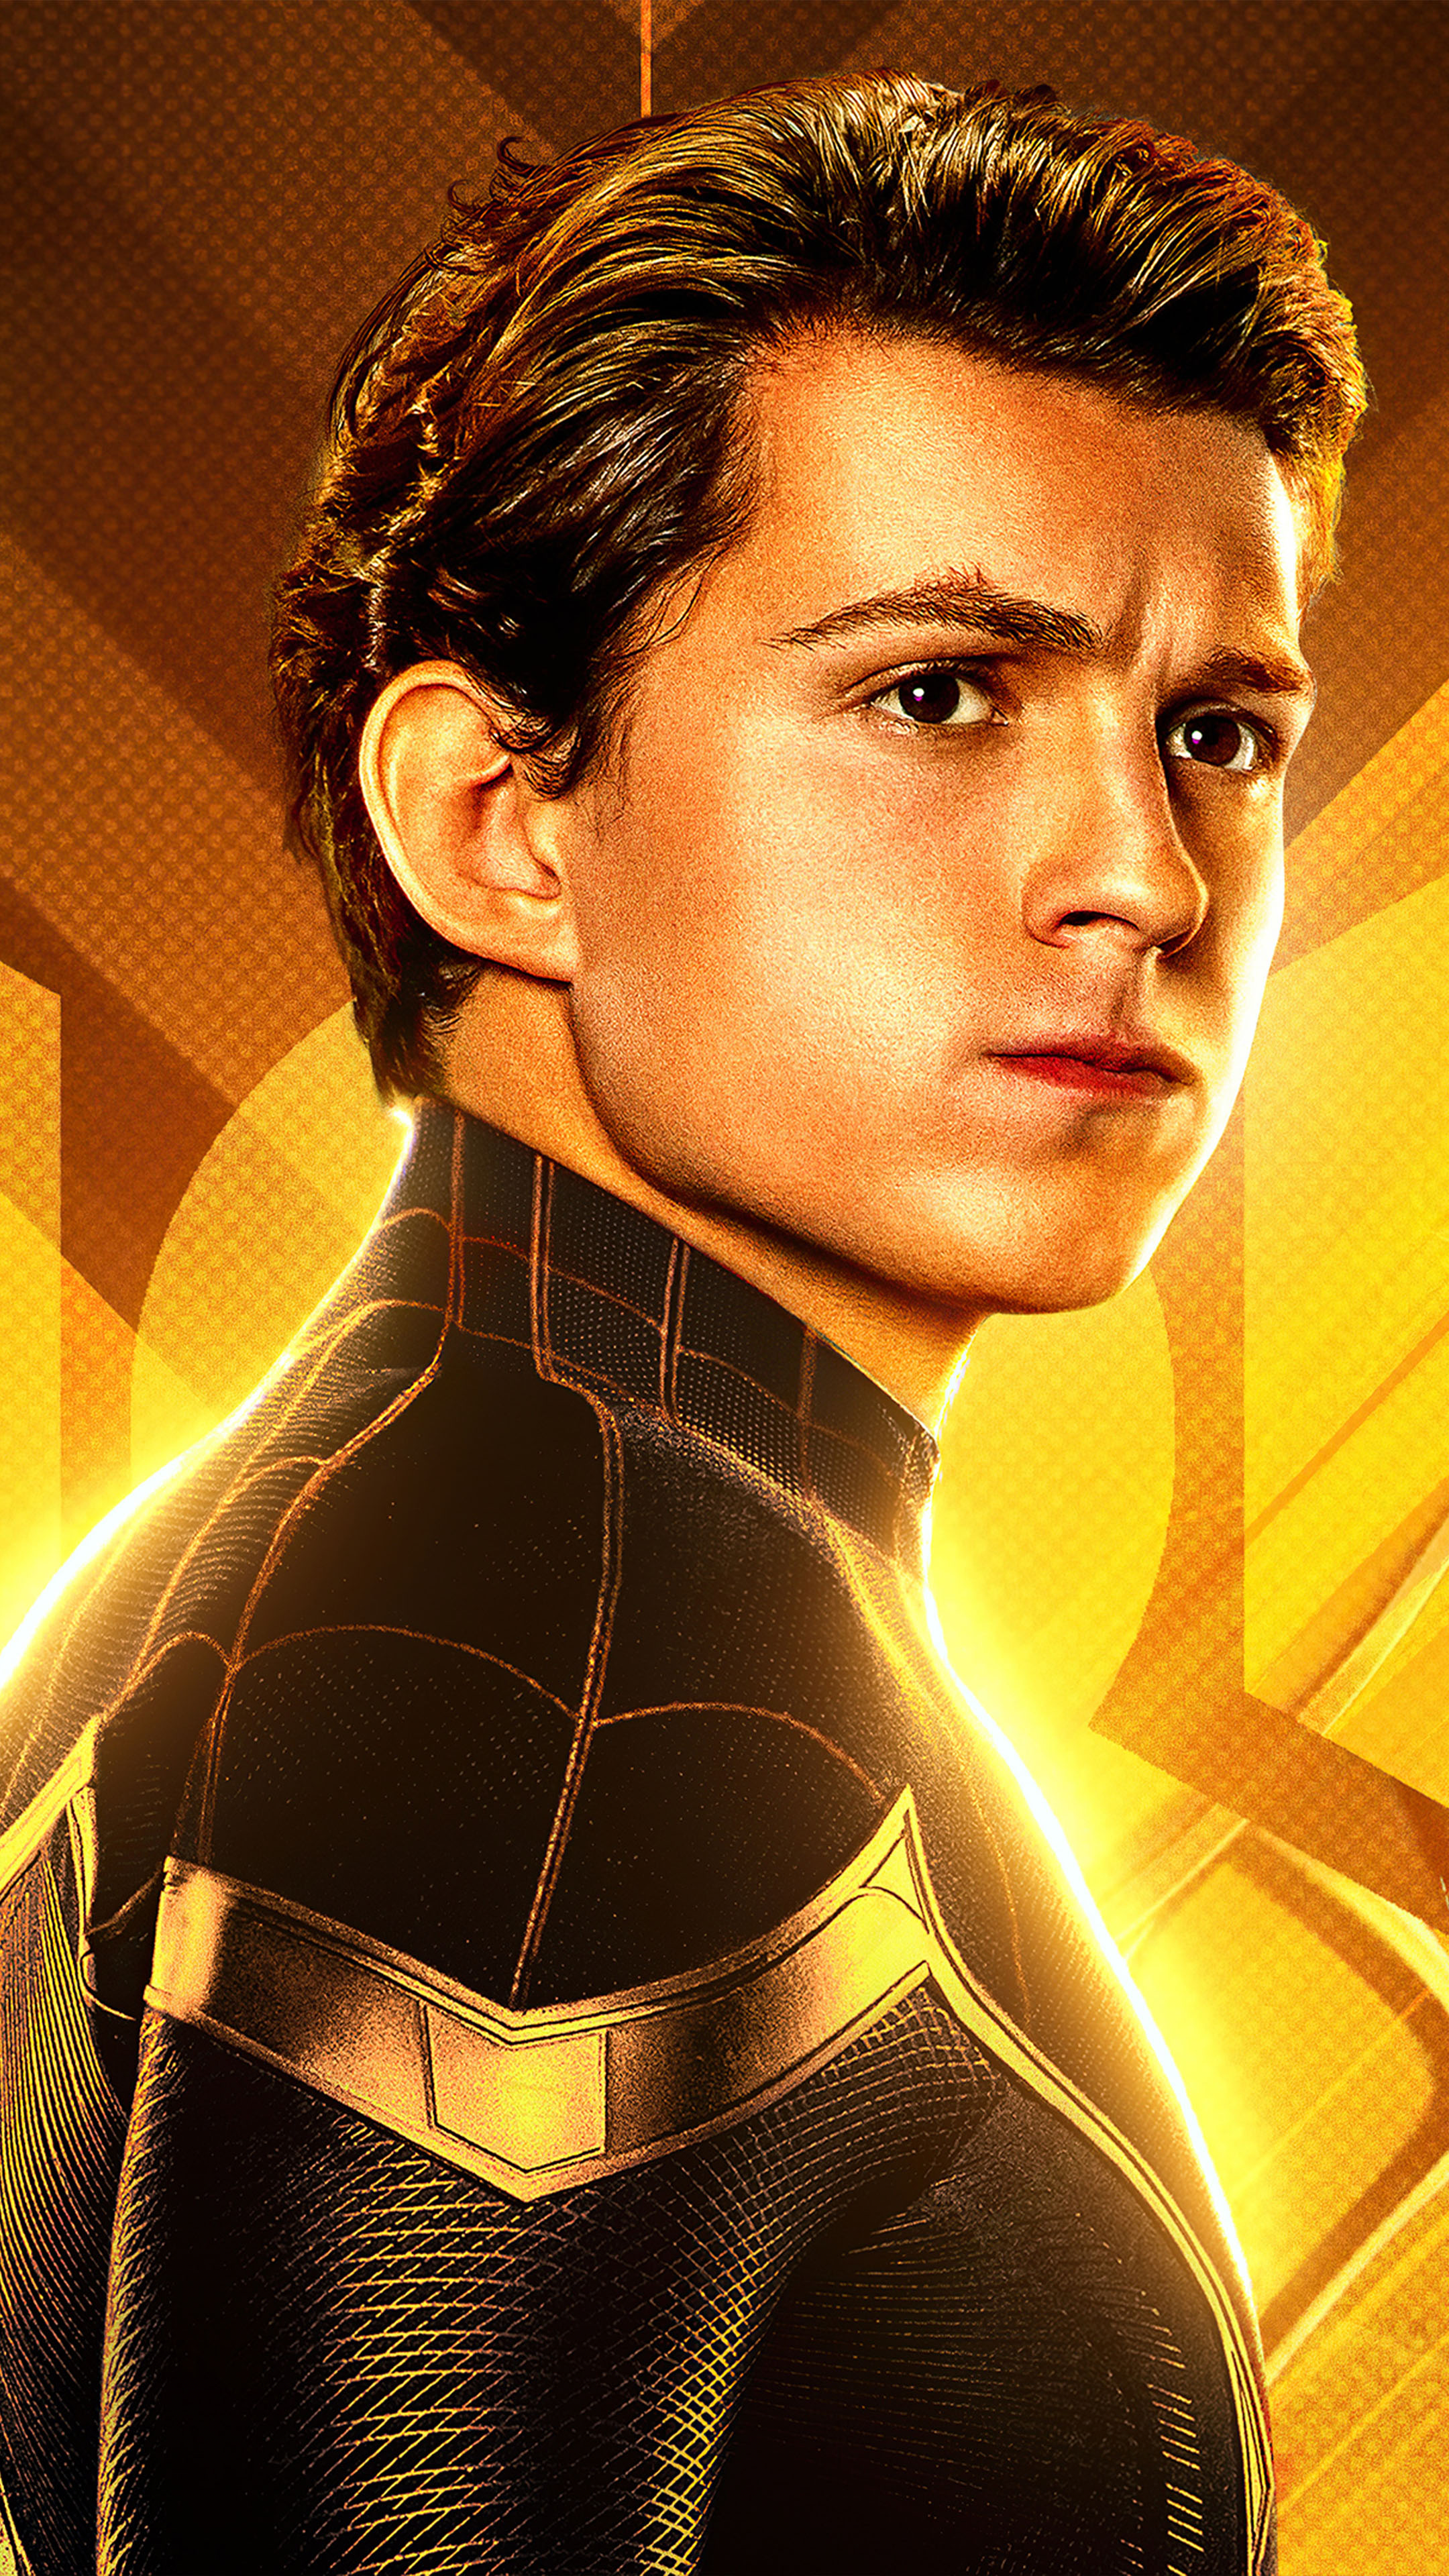 Tom Holland In Spider-Man No Way Home 4K Ultra HD Mobile Wallpaper